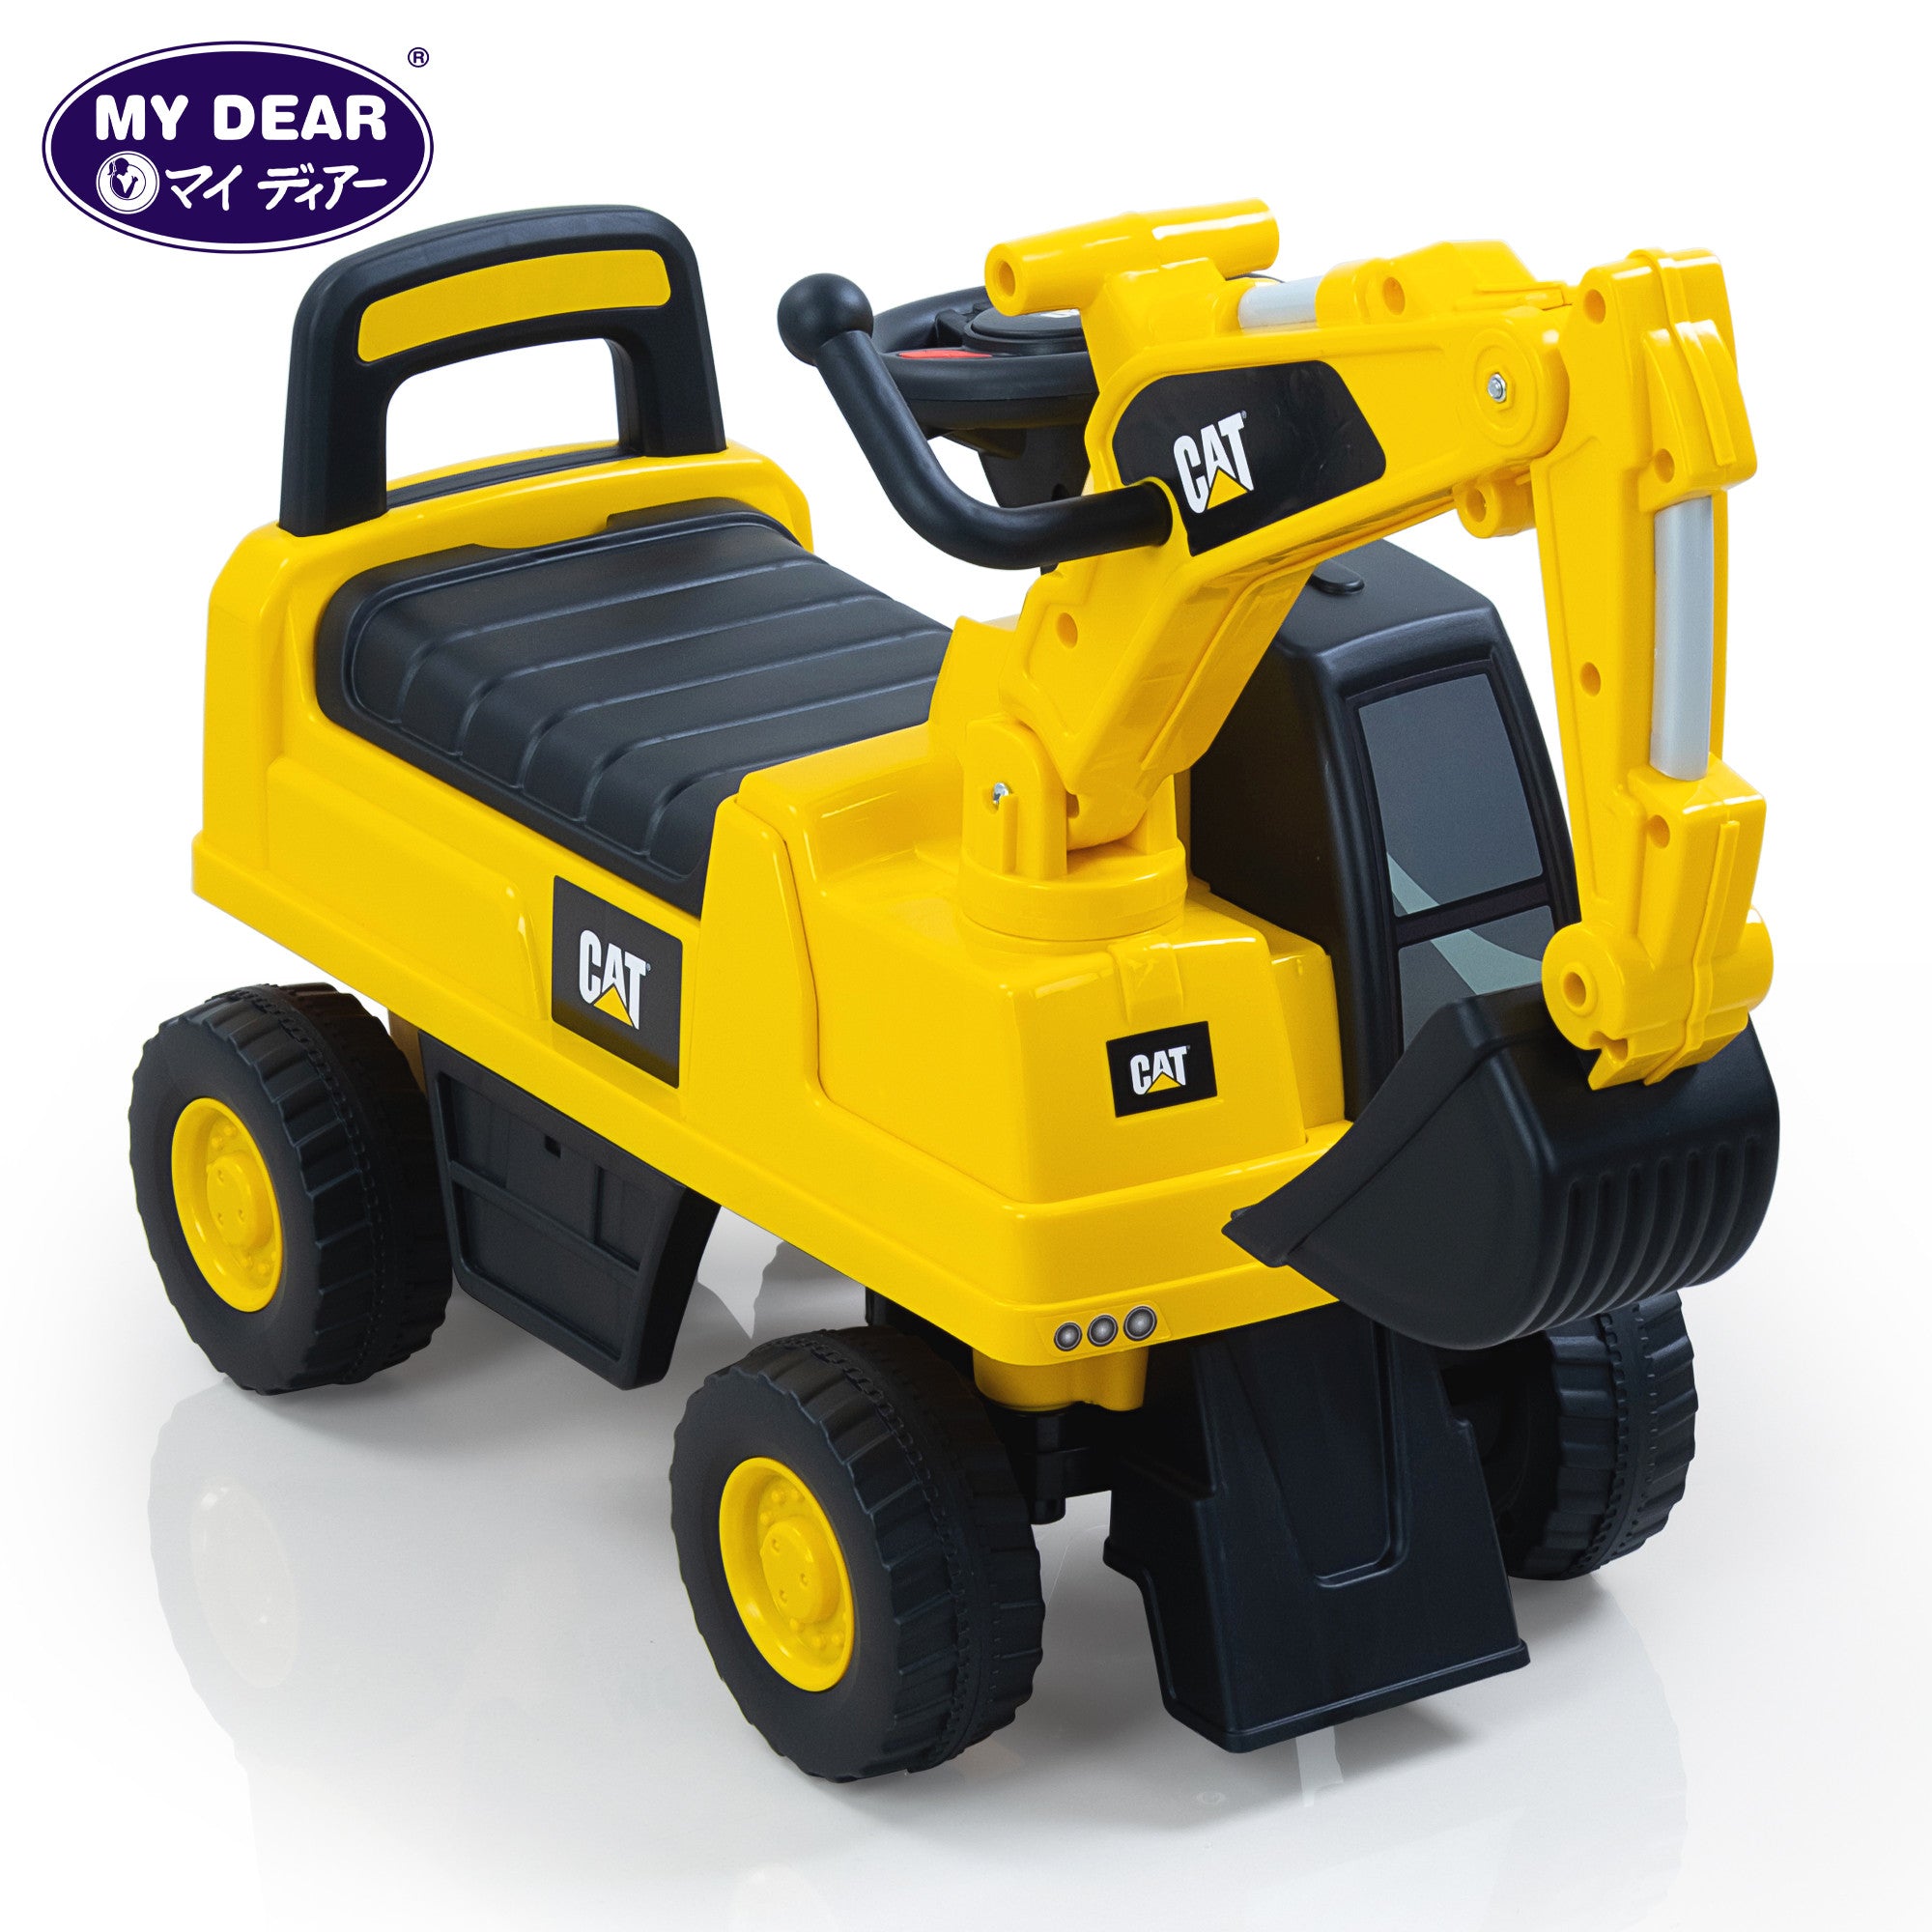 My Dear Ride On Car 23112 CAT Excavator With Digger Arm, Steering Horn & Storage Compartment